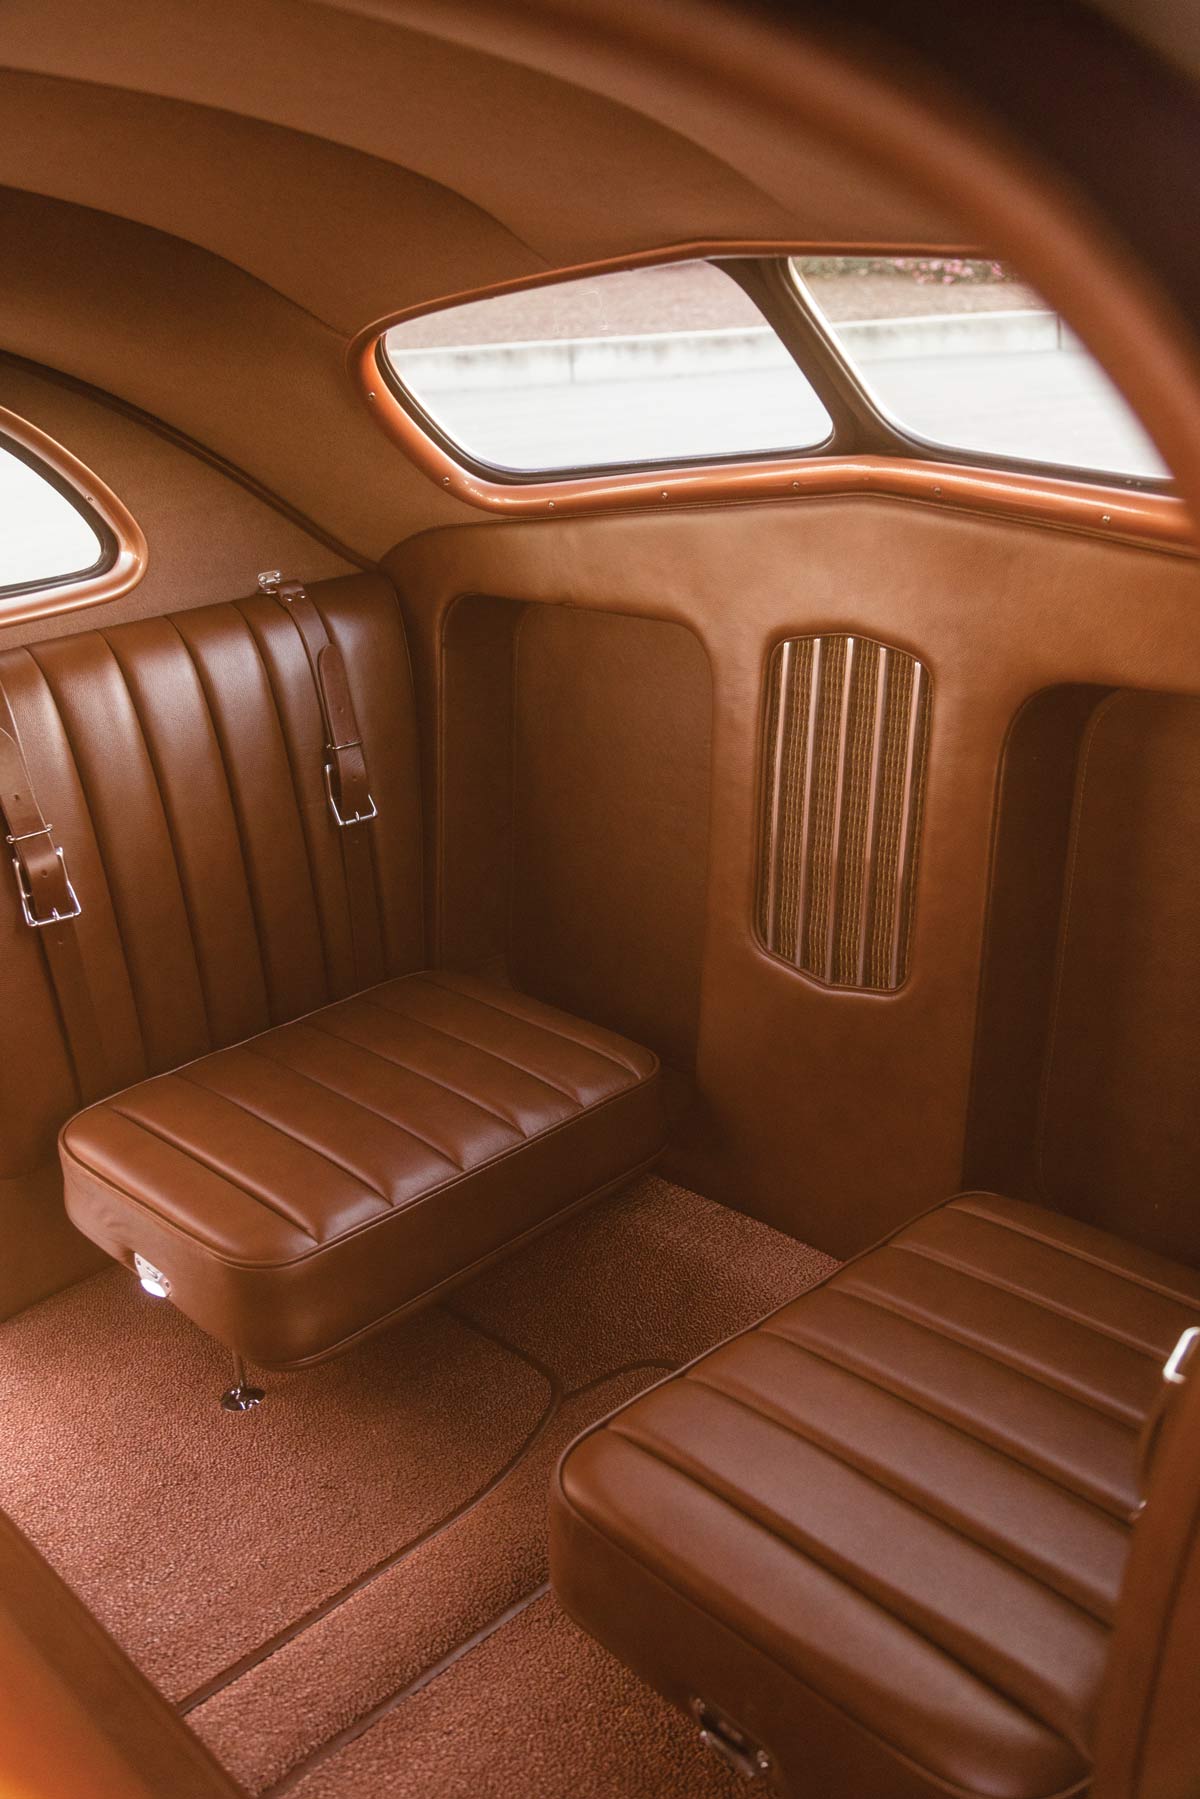 ’37 LaSalle Opera coupe's leather seats